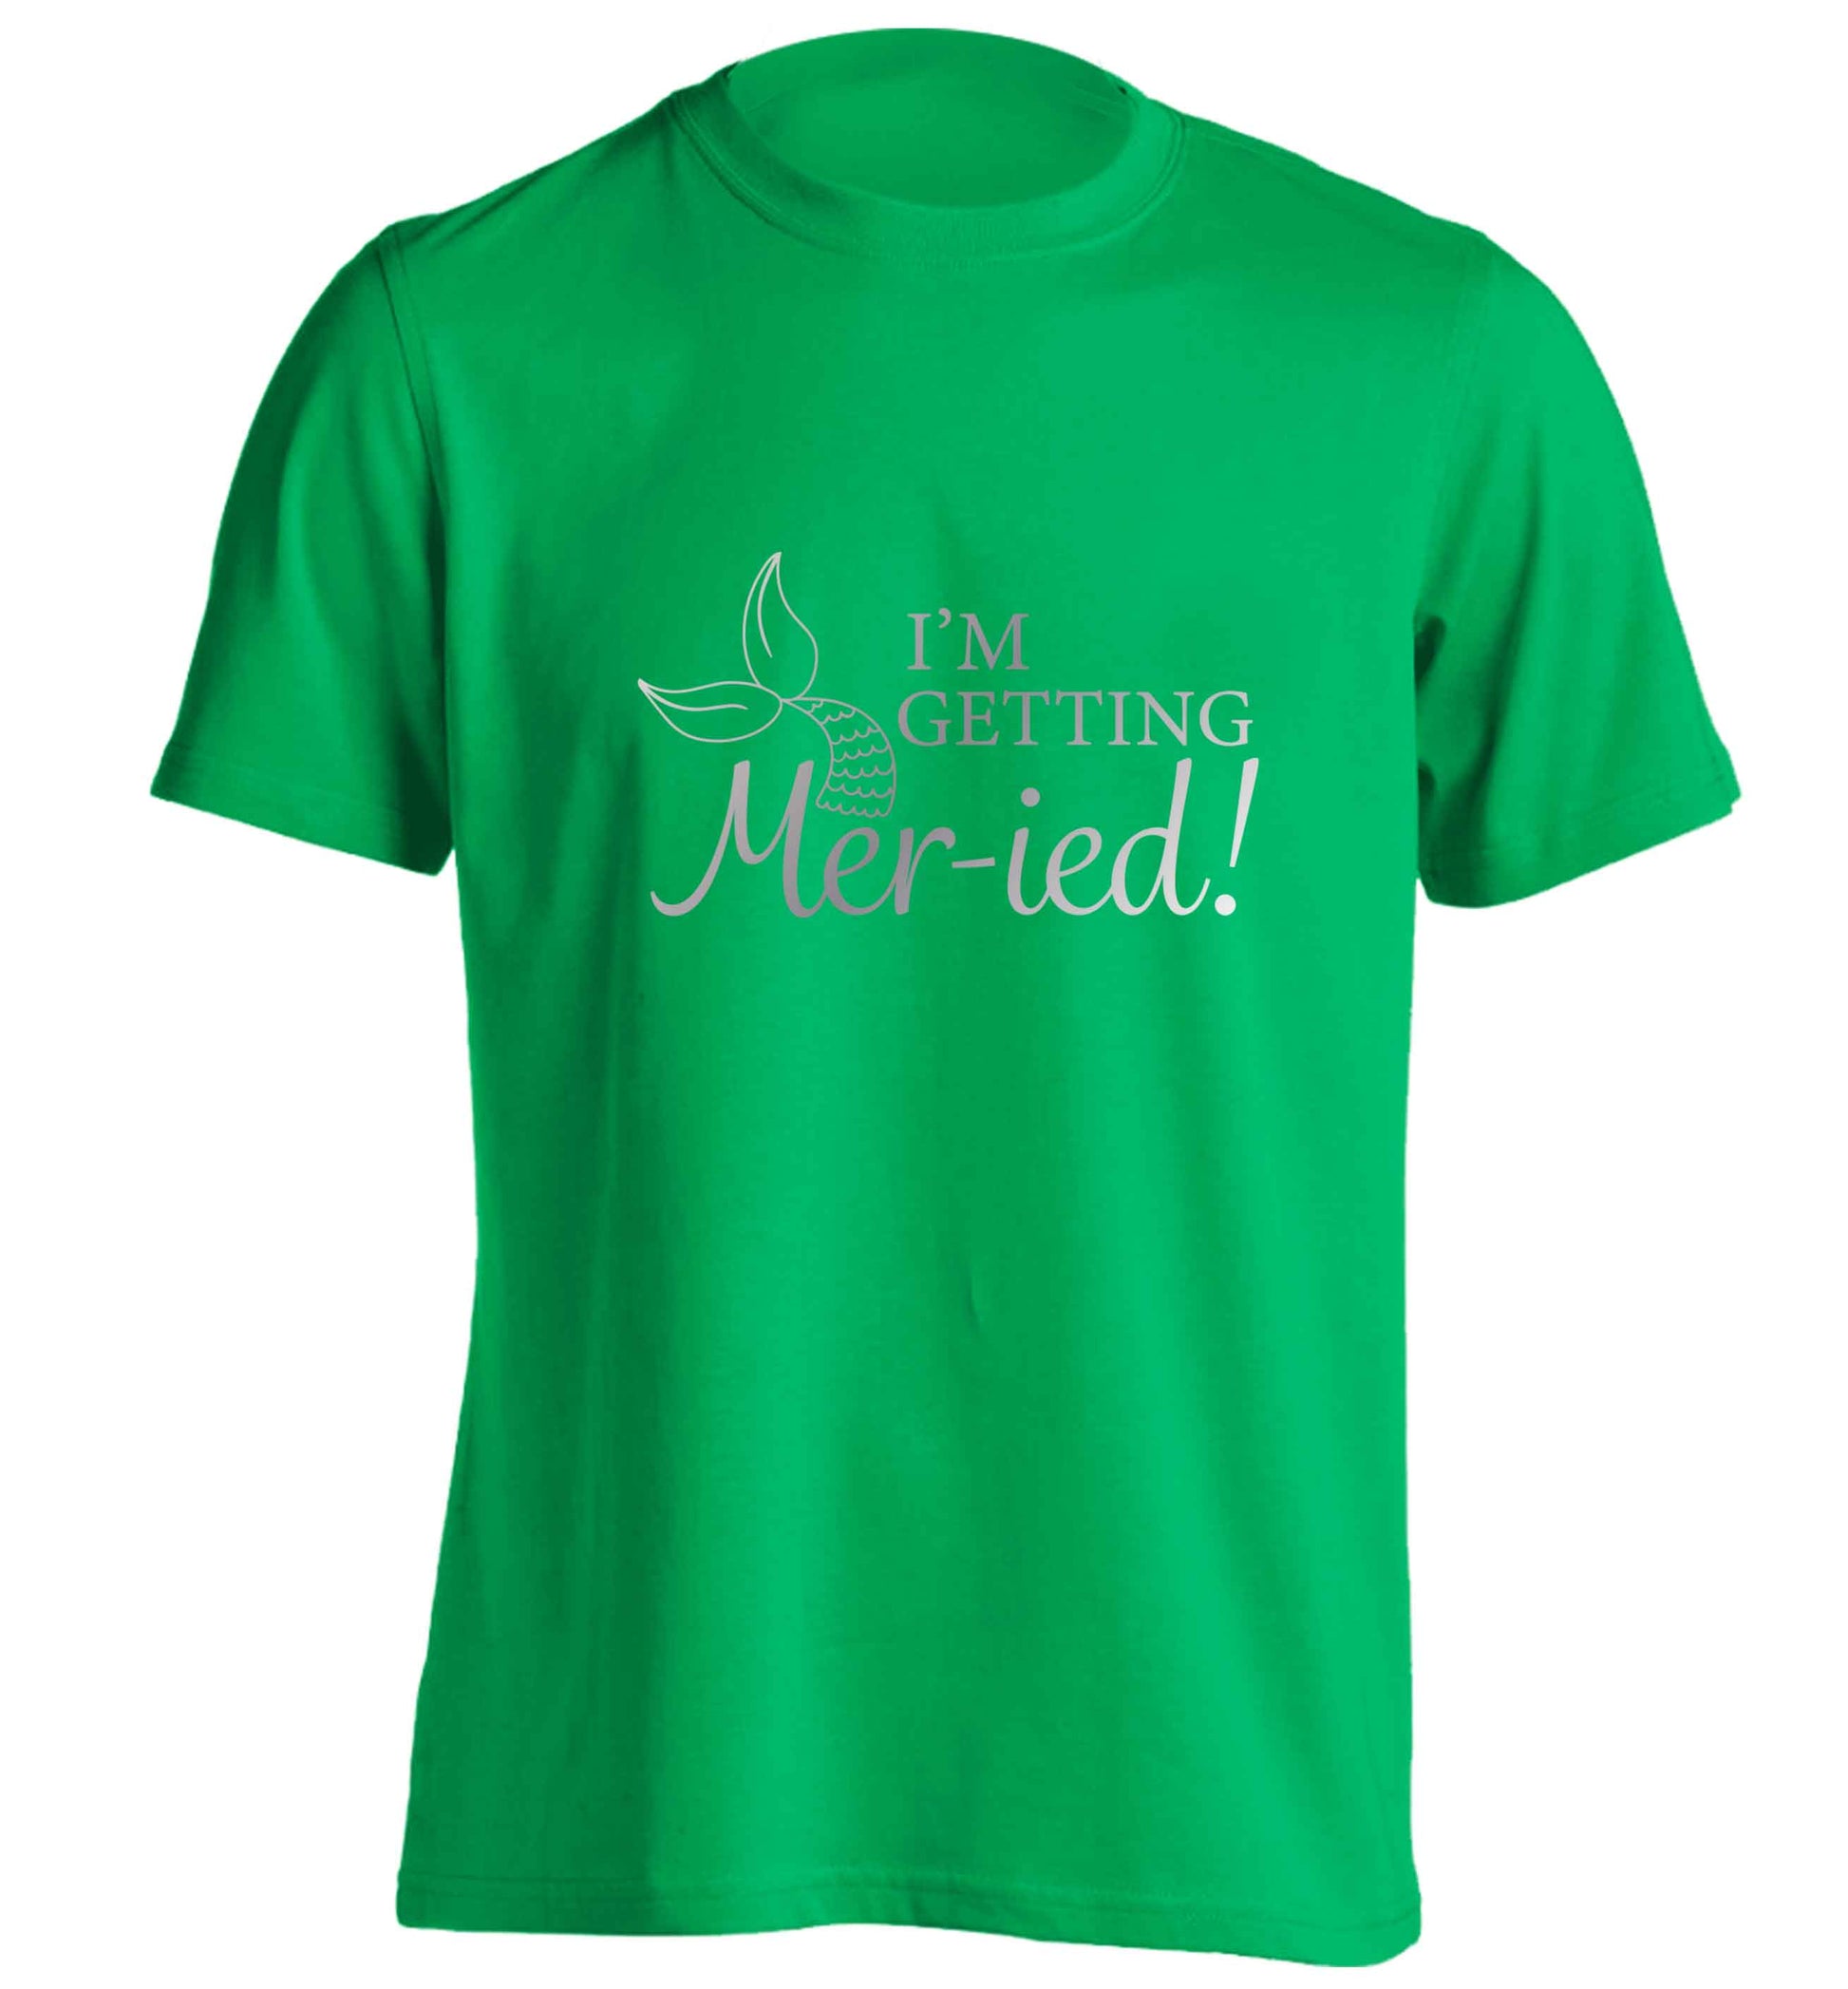 Personalised wedding thank you's Mr and Mrs wedding and date! Ideal wedding favours! adults unisex green Tshirt 2XL